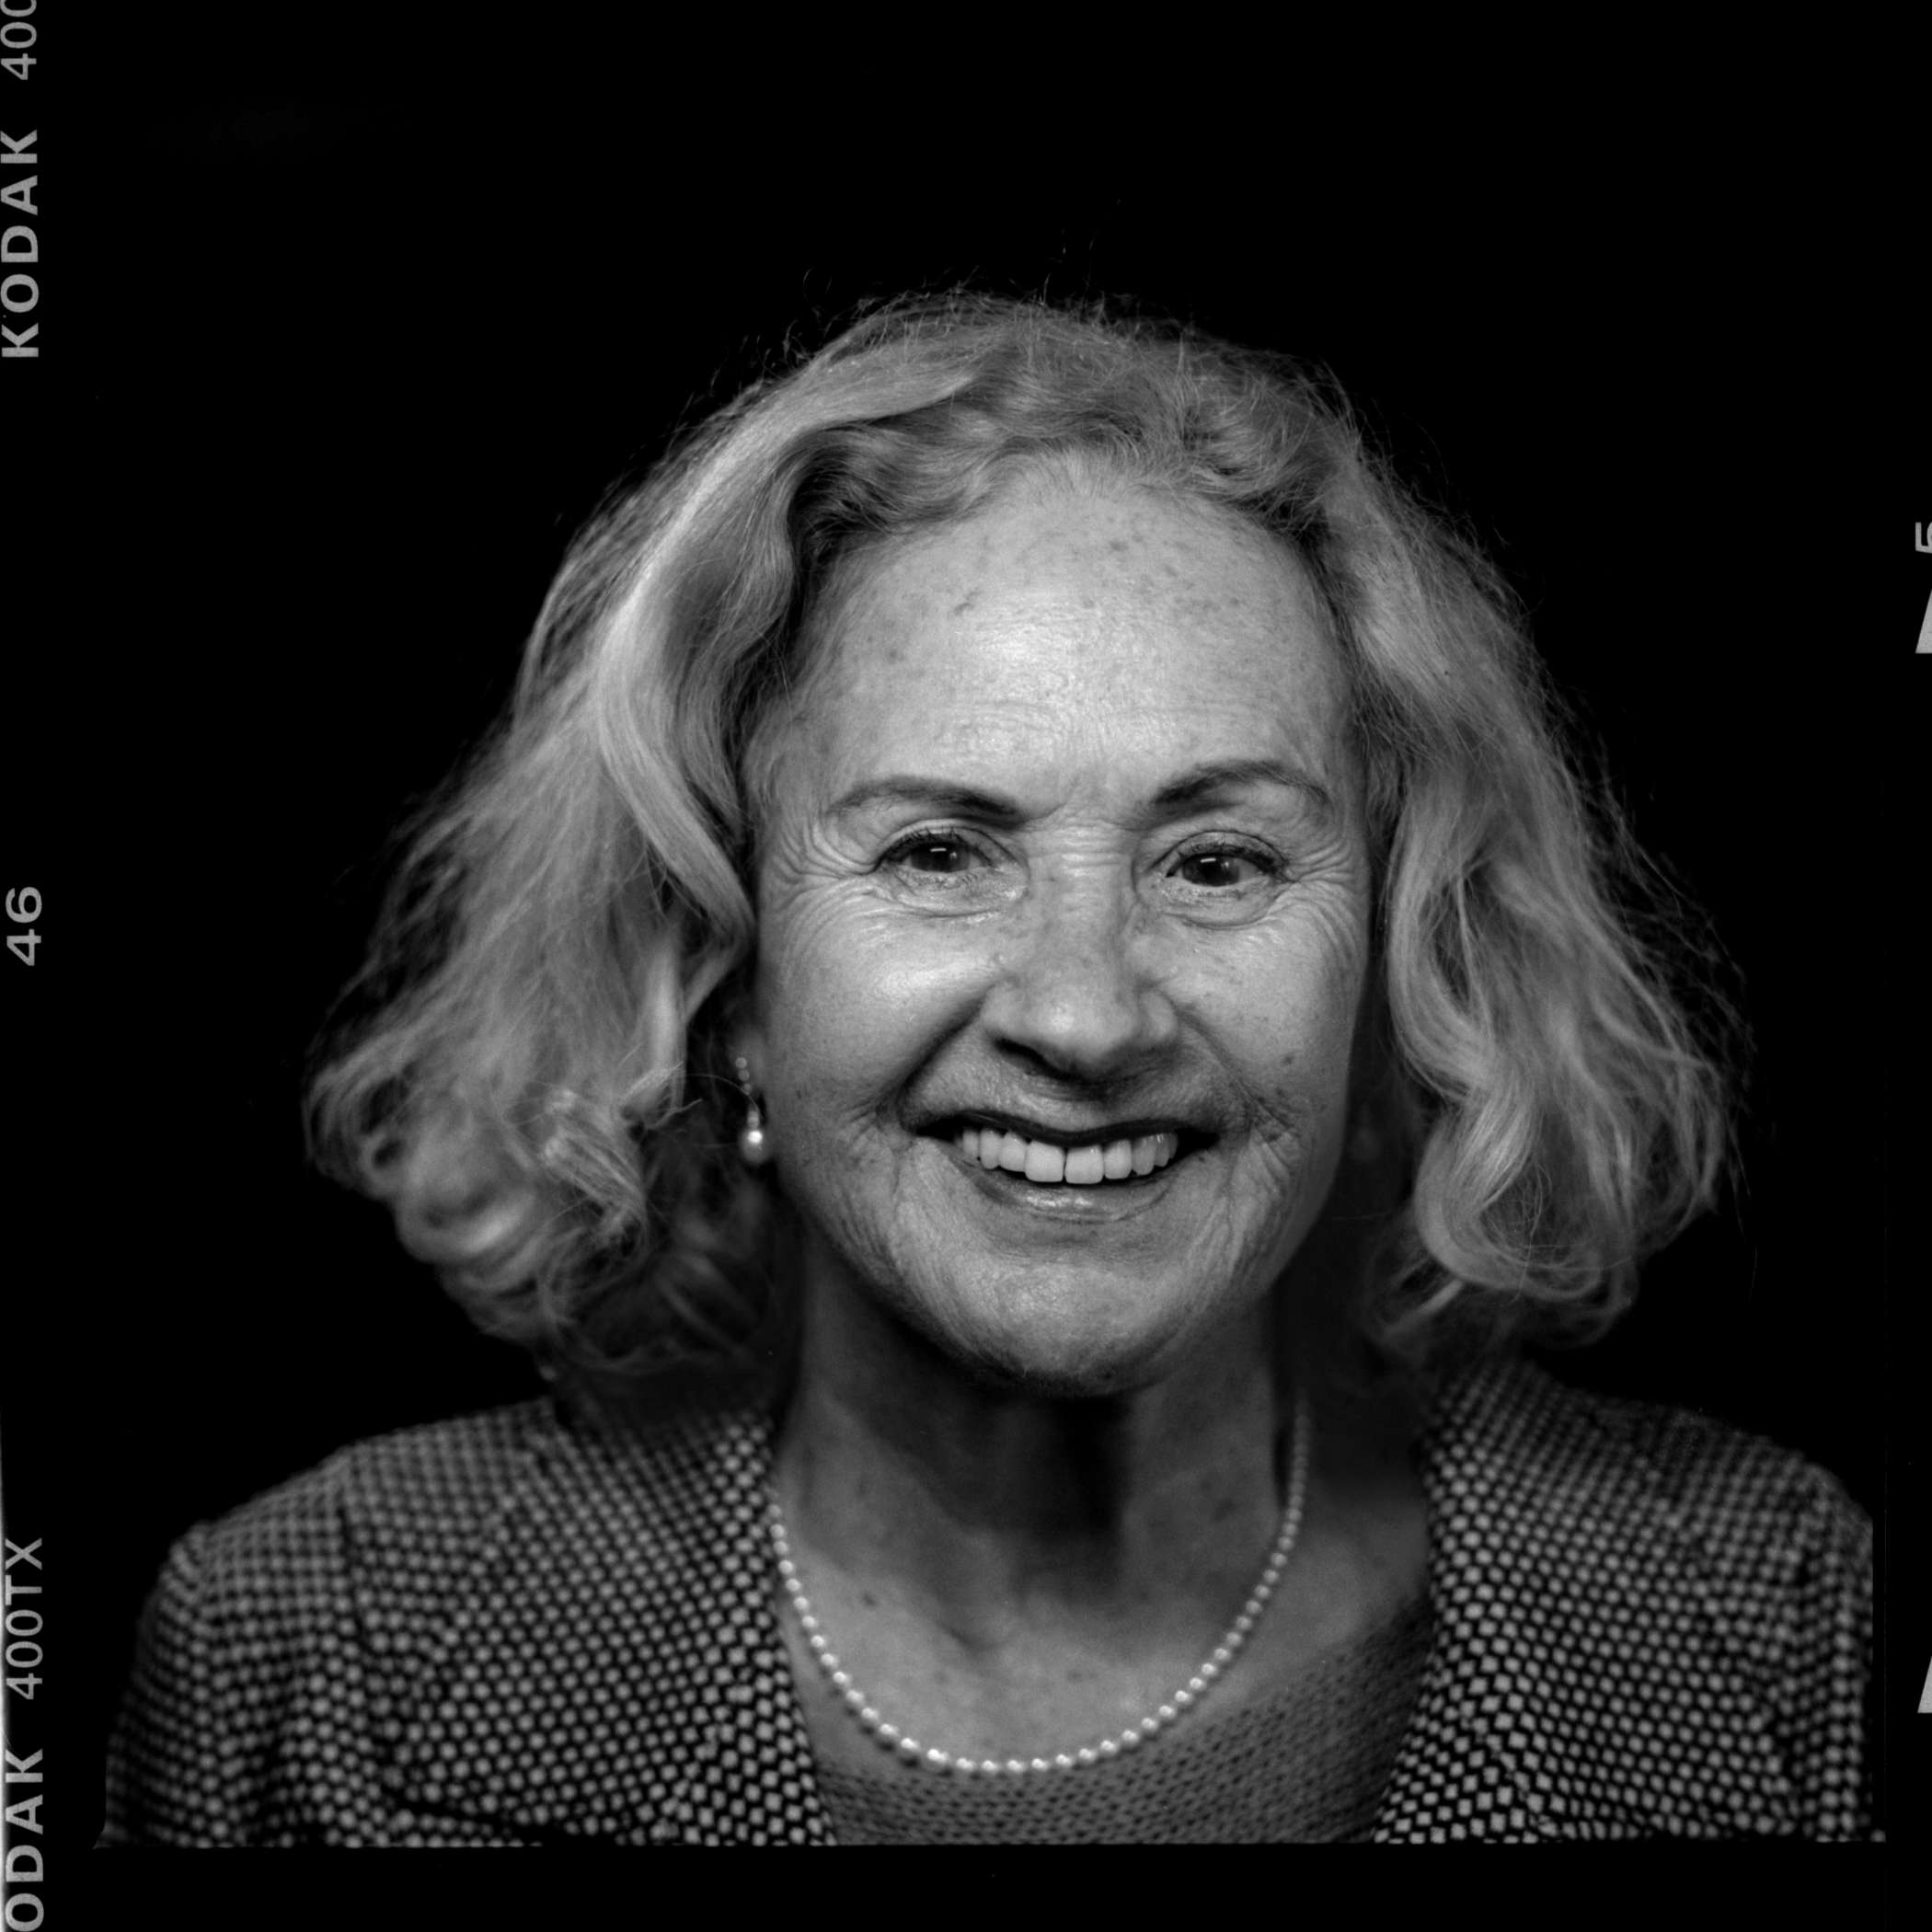 Black and white Hasselblad portrait of Swiss writer Eveline Hasler